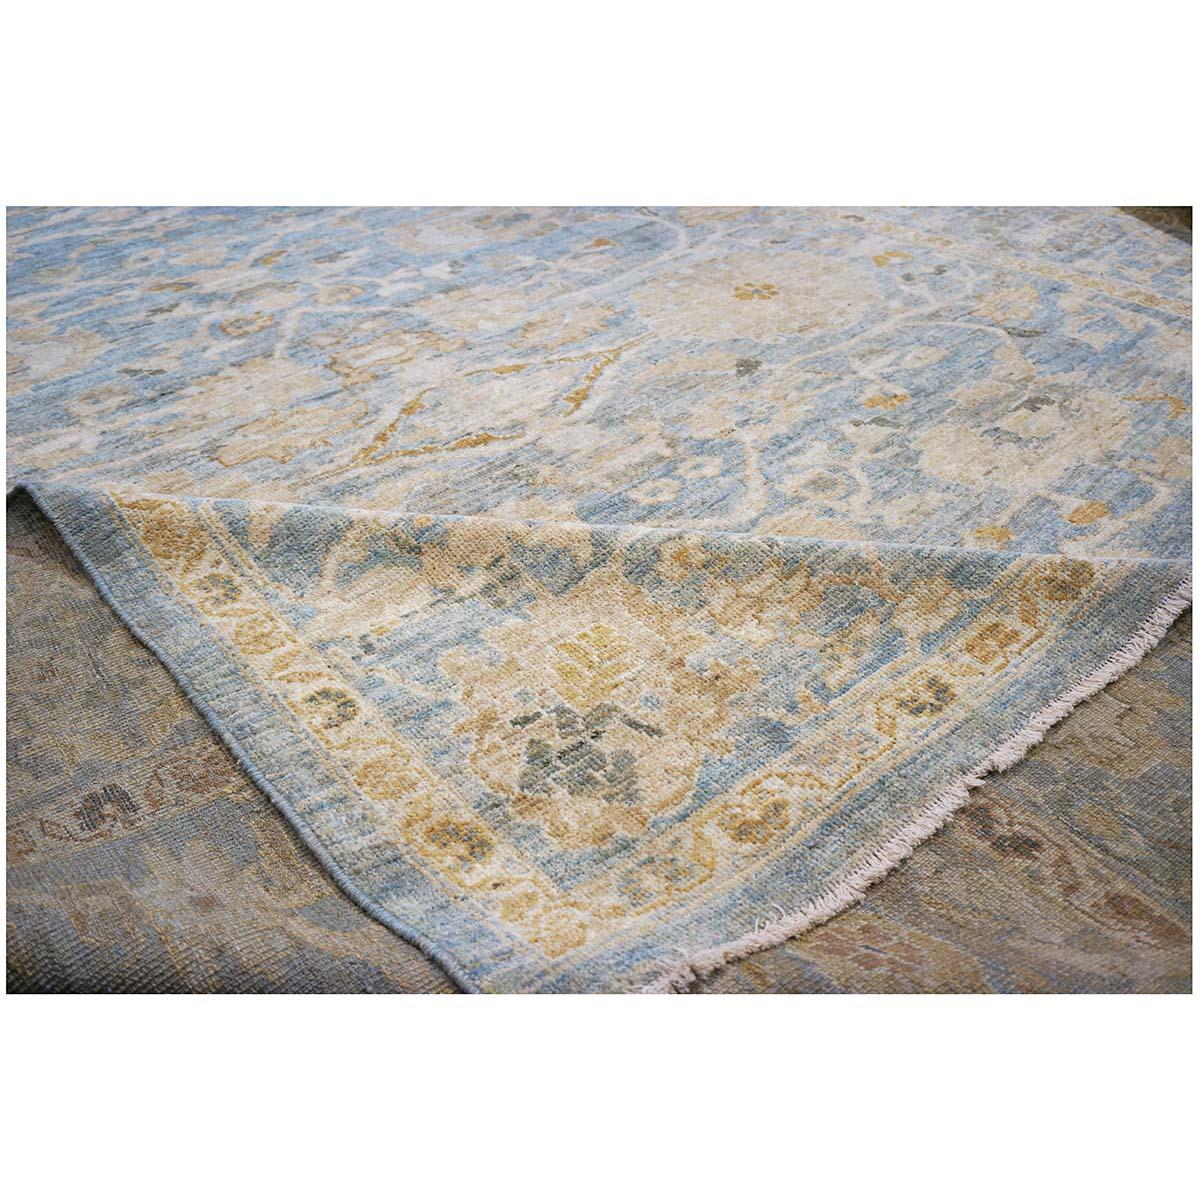 21st Century Persian Sultanabad 9x12 Blue, Tan, & Yellow Handmade Area Rug For Sale 1